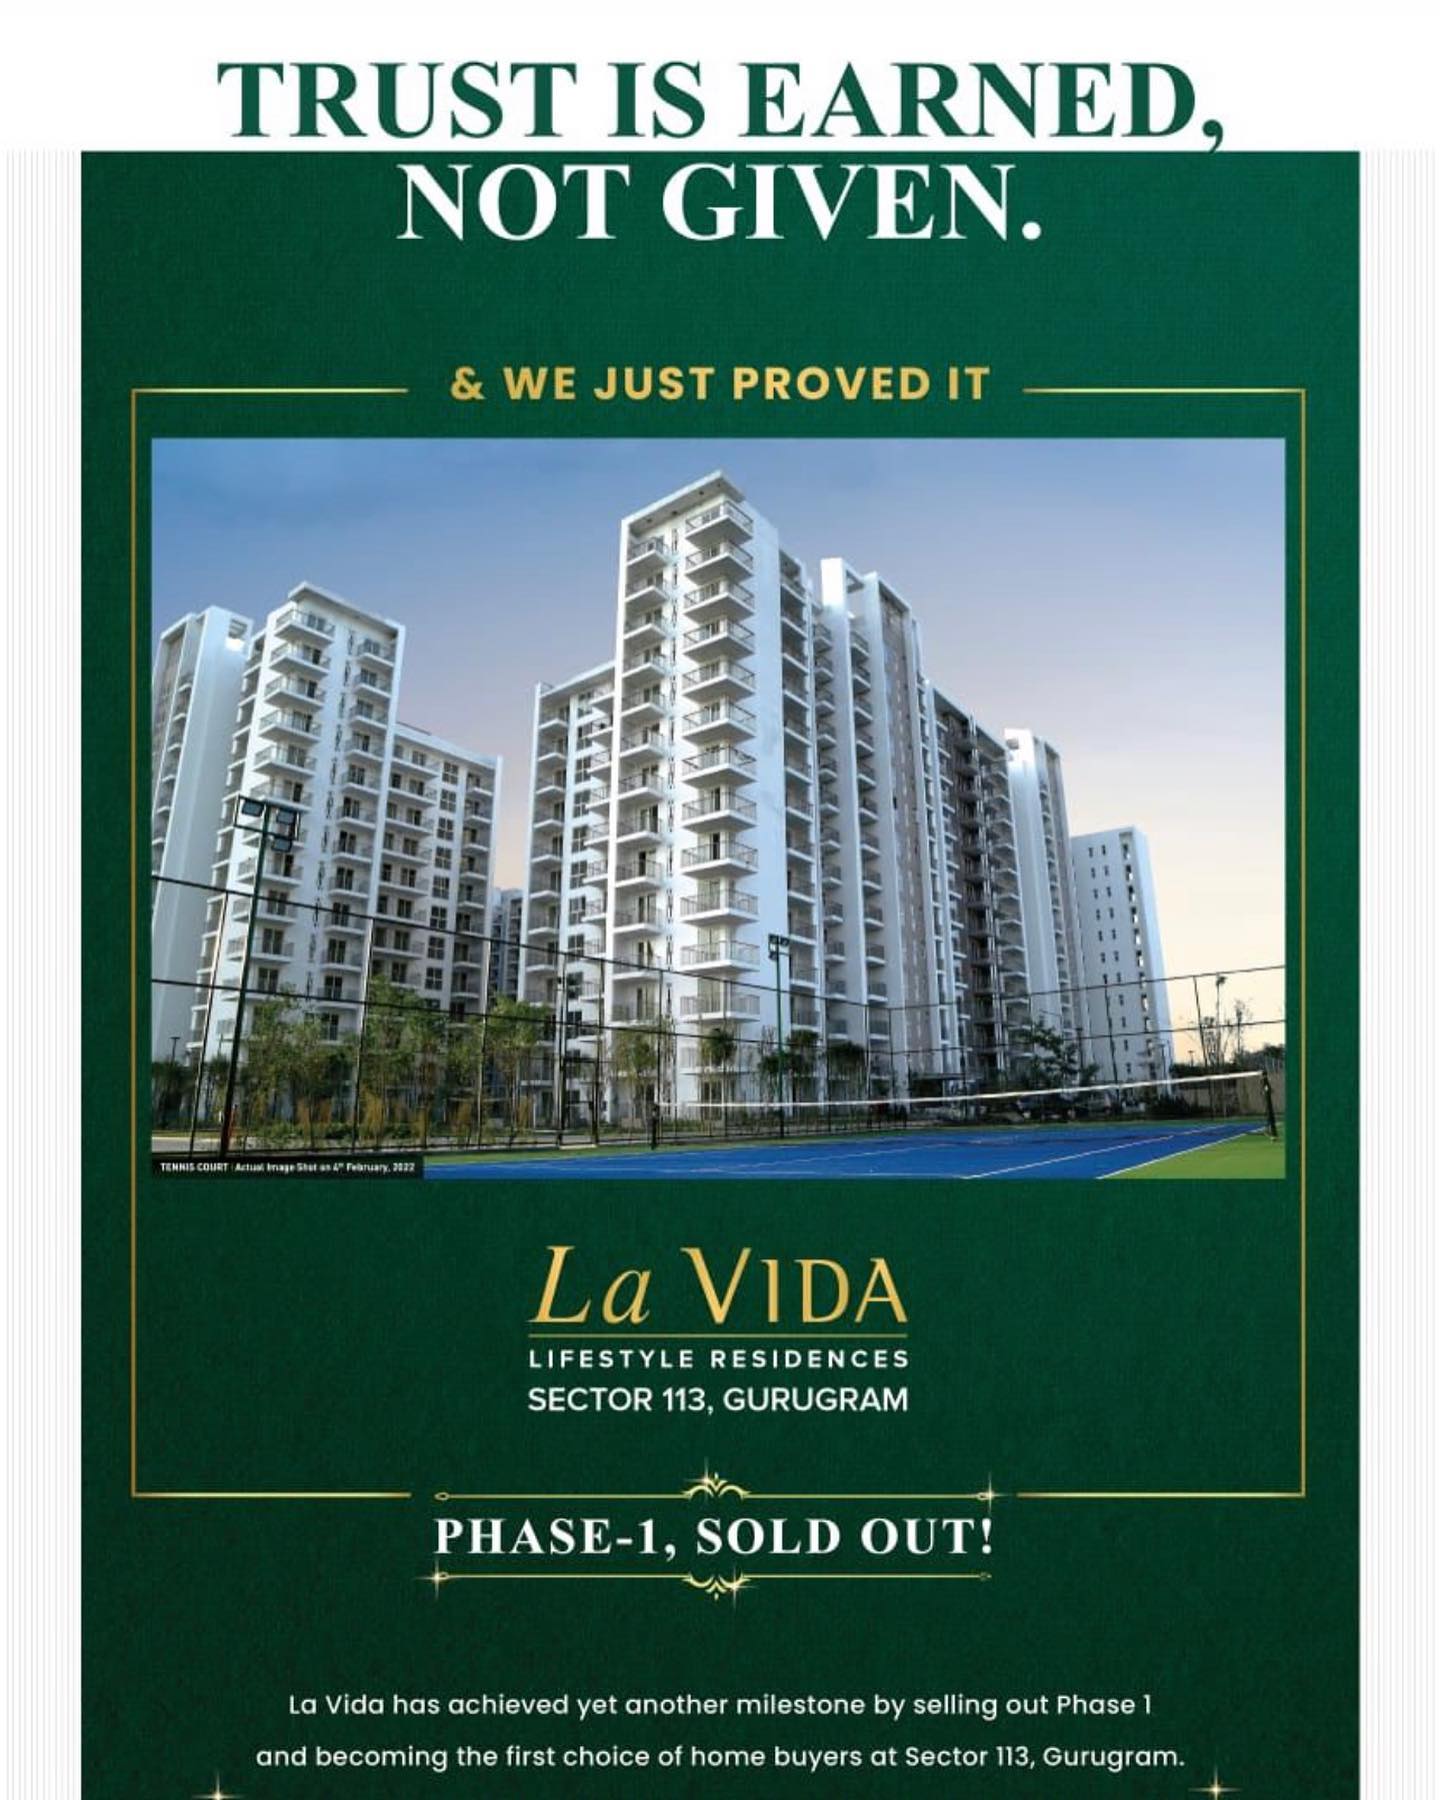 Phase 1 sold out at Tata La Vida in Sector 113, Gurgaon Update